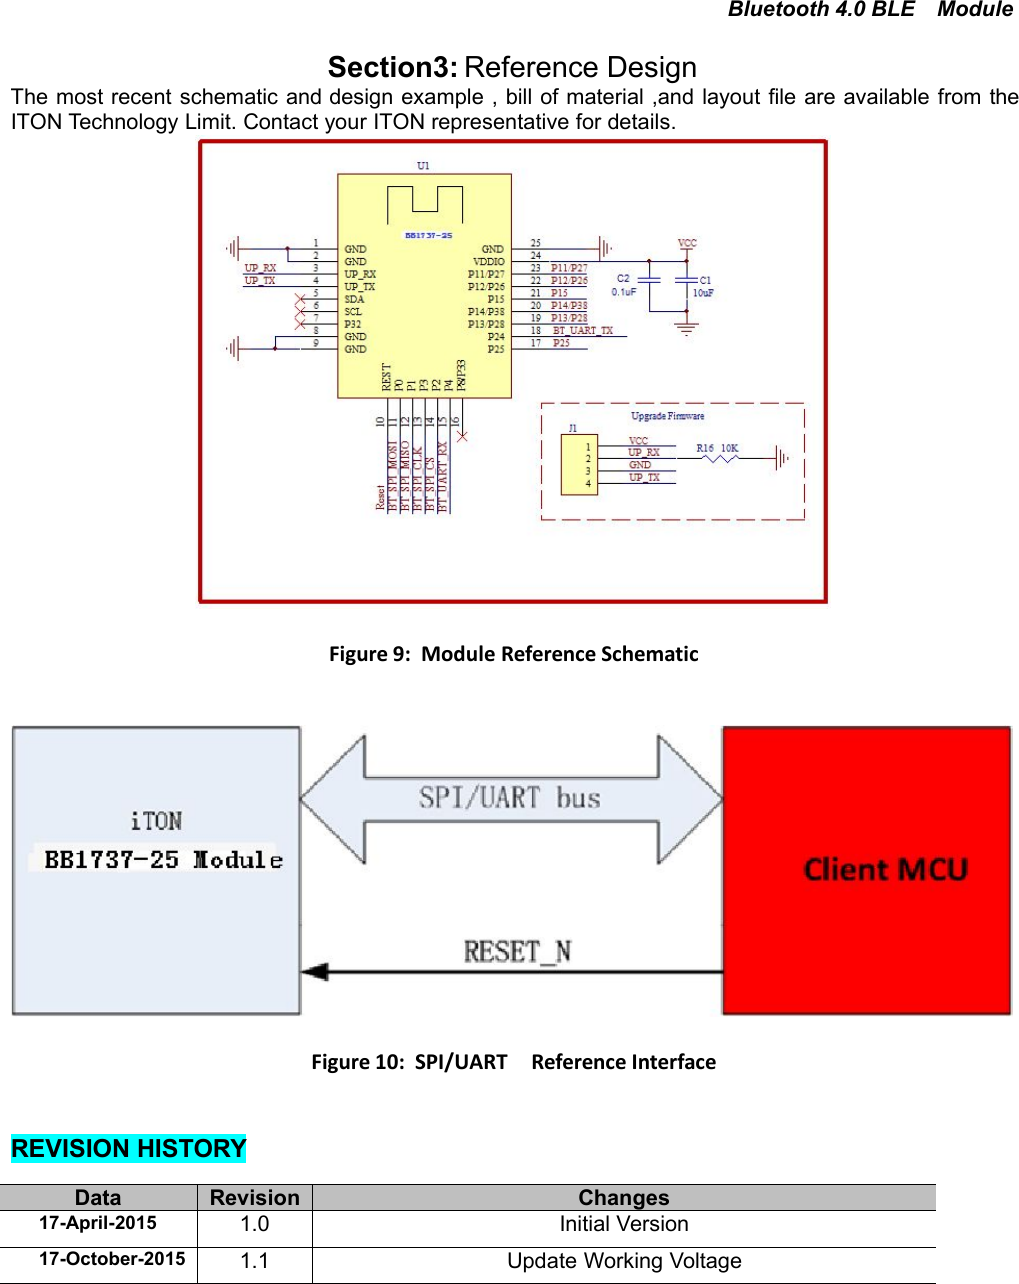 Bluetooth 4.0 BLE ModuleSection3: Reference DesignThe most recent schematic and design example , bill of material ,and layout file are available from theITON Technology Limit. Contact your ITON representative for details.Figure 9: Module Reference SchematicFigure 10: SPI/UART Reference InterfaceREVISION HISTORYData Revision Changes17-April-2015 1.0 Initial Version17-October-2015 1.1 Update Working Voltage